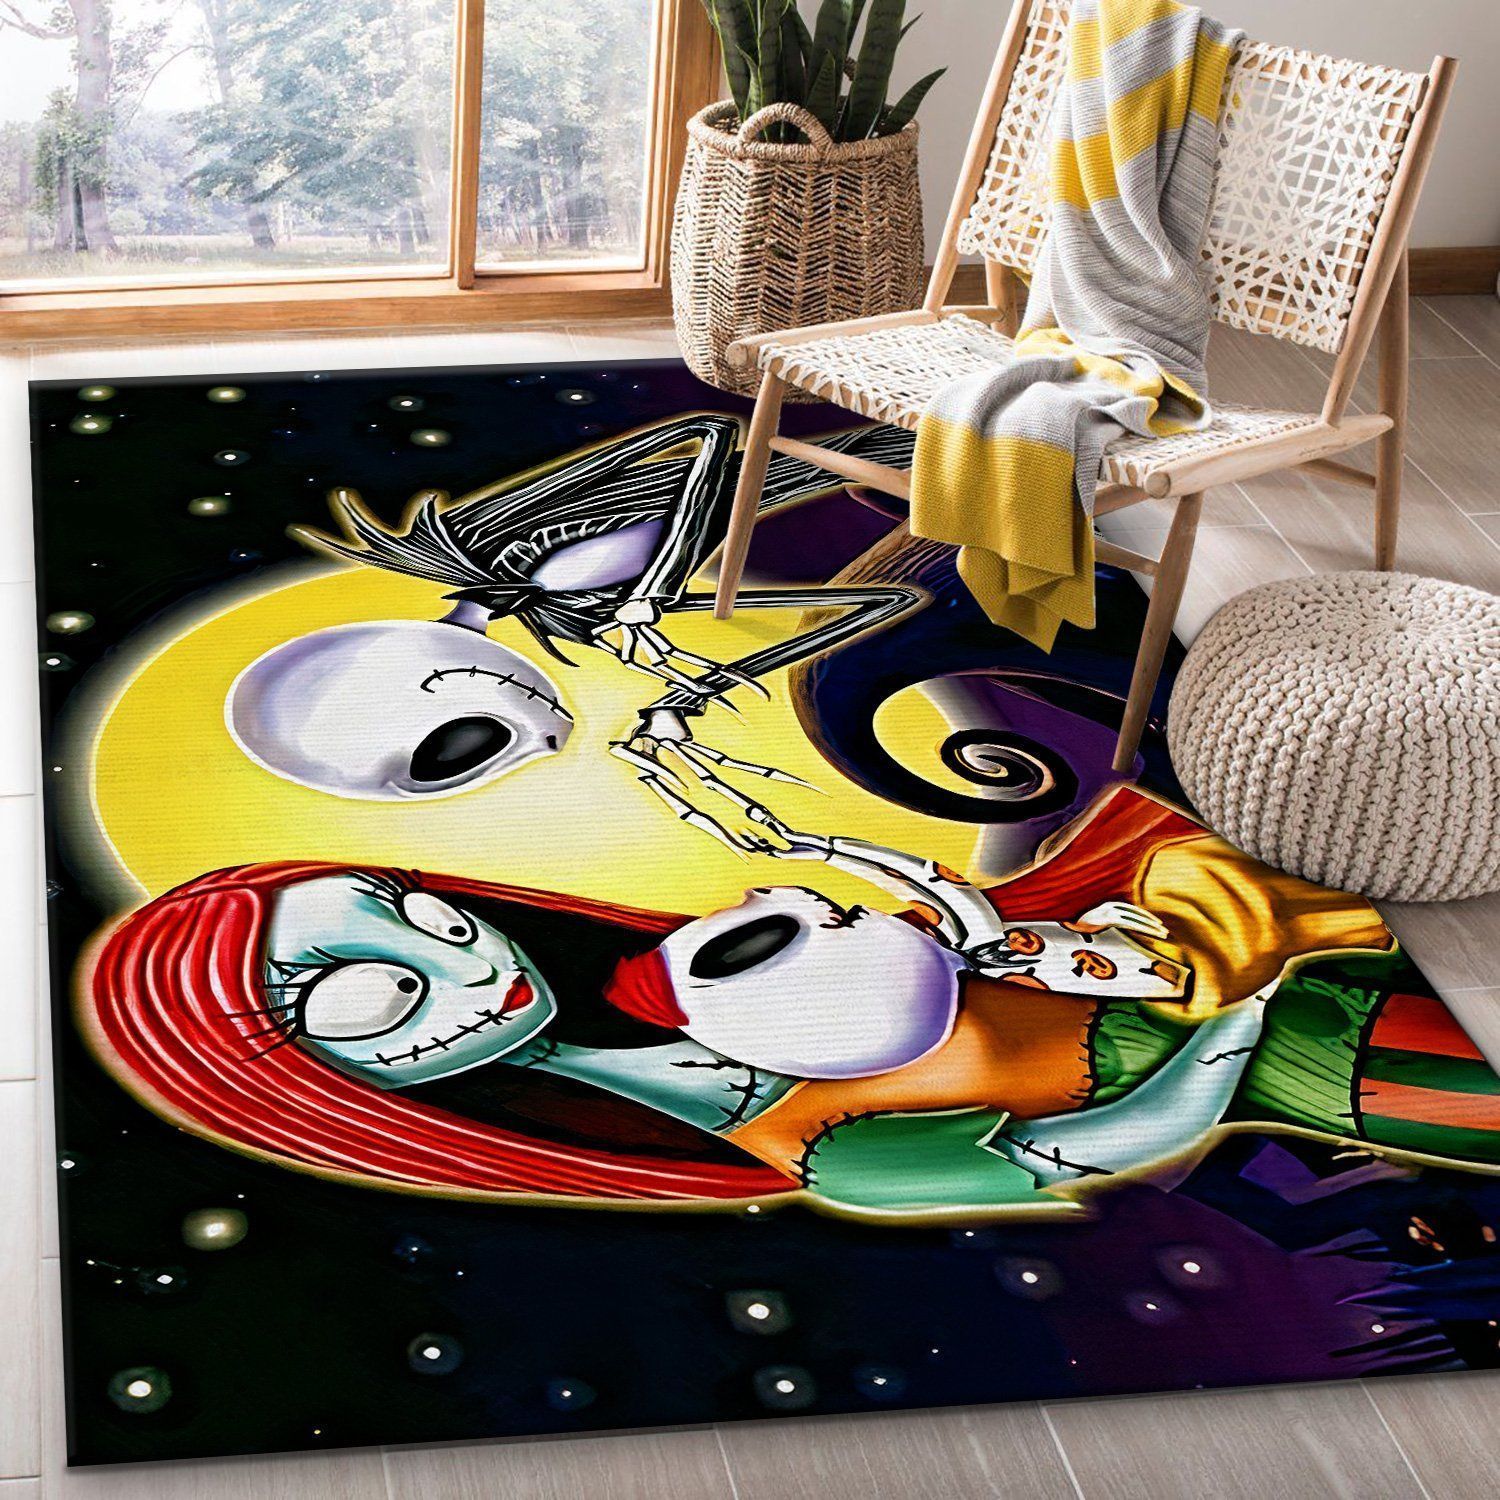 The nightmare before christmas Jack skellington family Area rug The US Decor - Indoor Outdoor Rugs